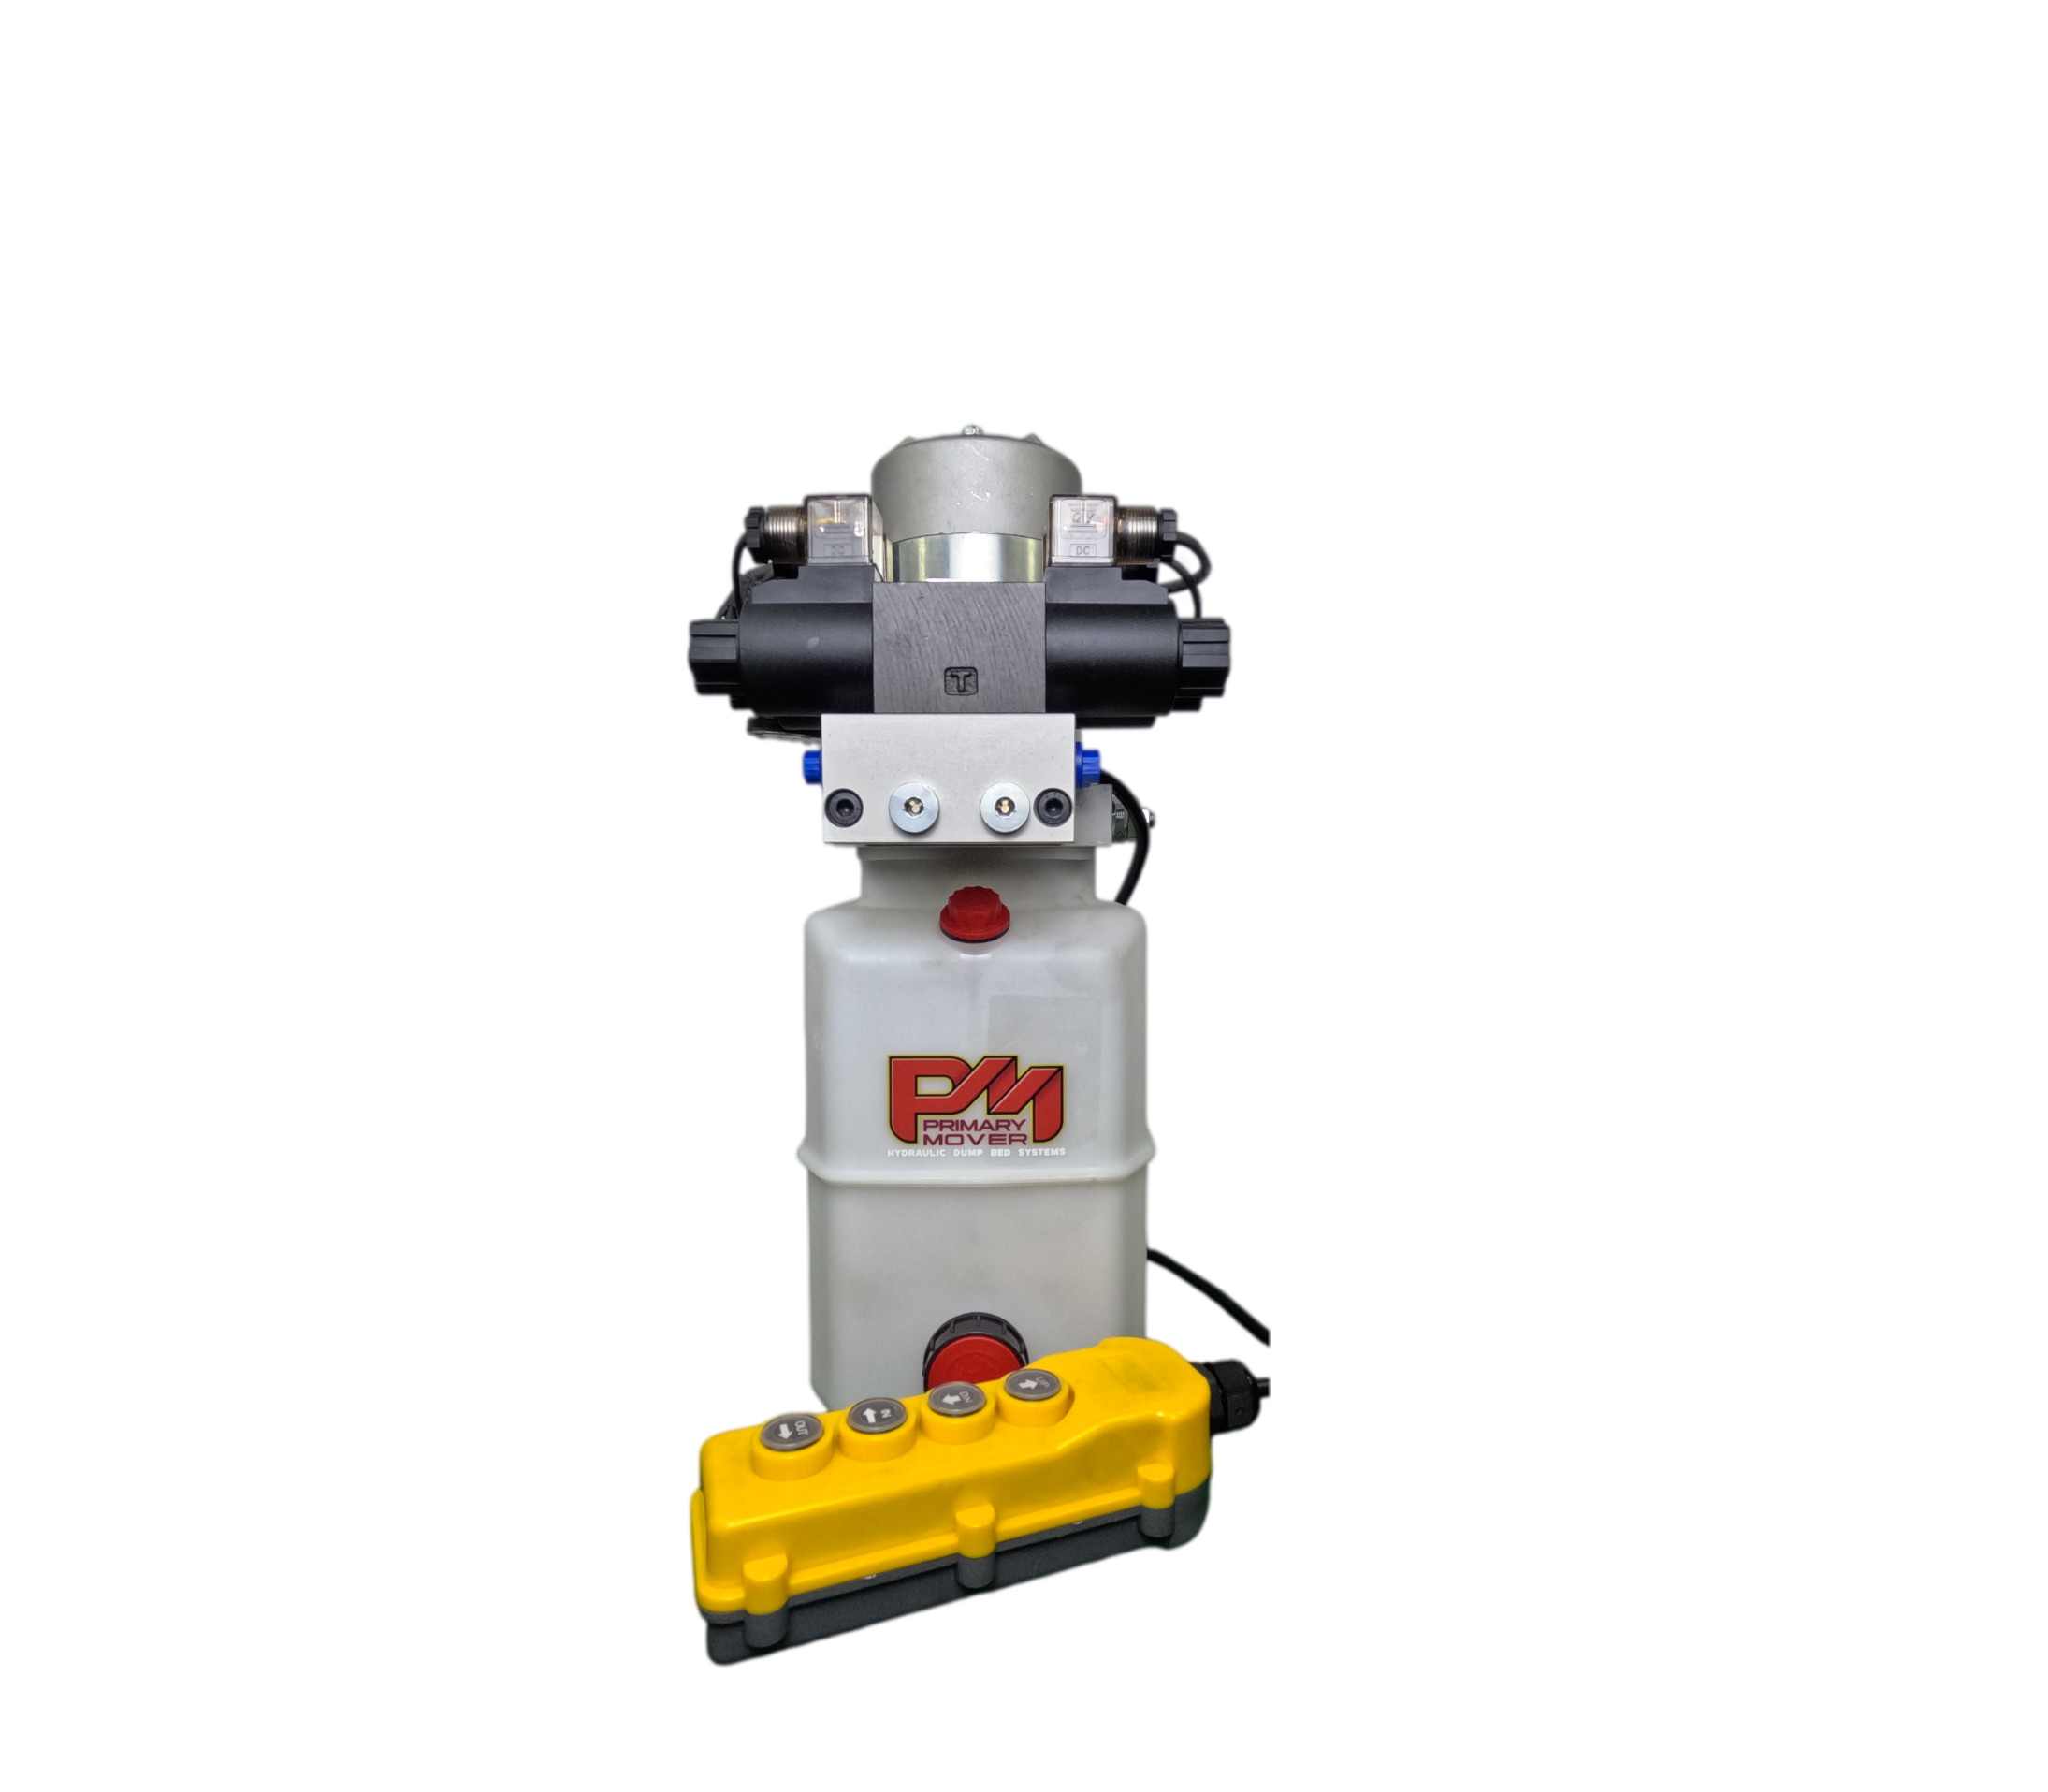 Compact Dual Double Hydraulic Power Unit for dump trailers and trucks, featuring quad power capability for versatile hydraulic operations. Built for efficiency and reliability by PrimaryMover.com.